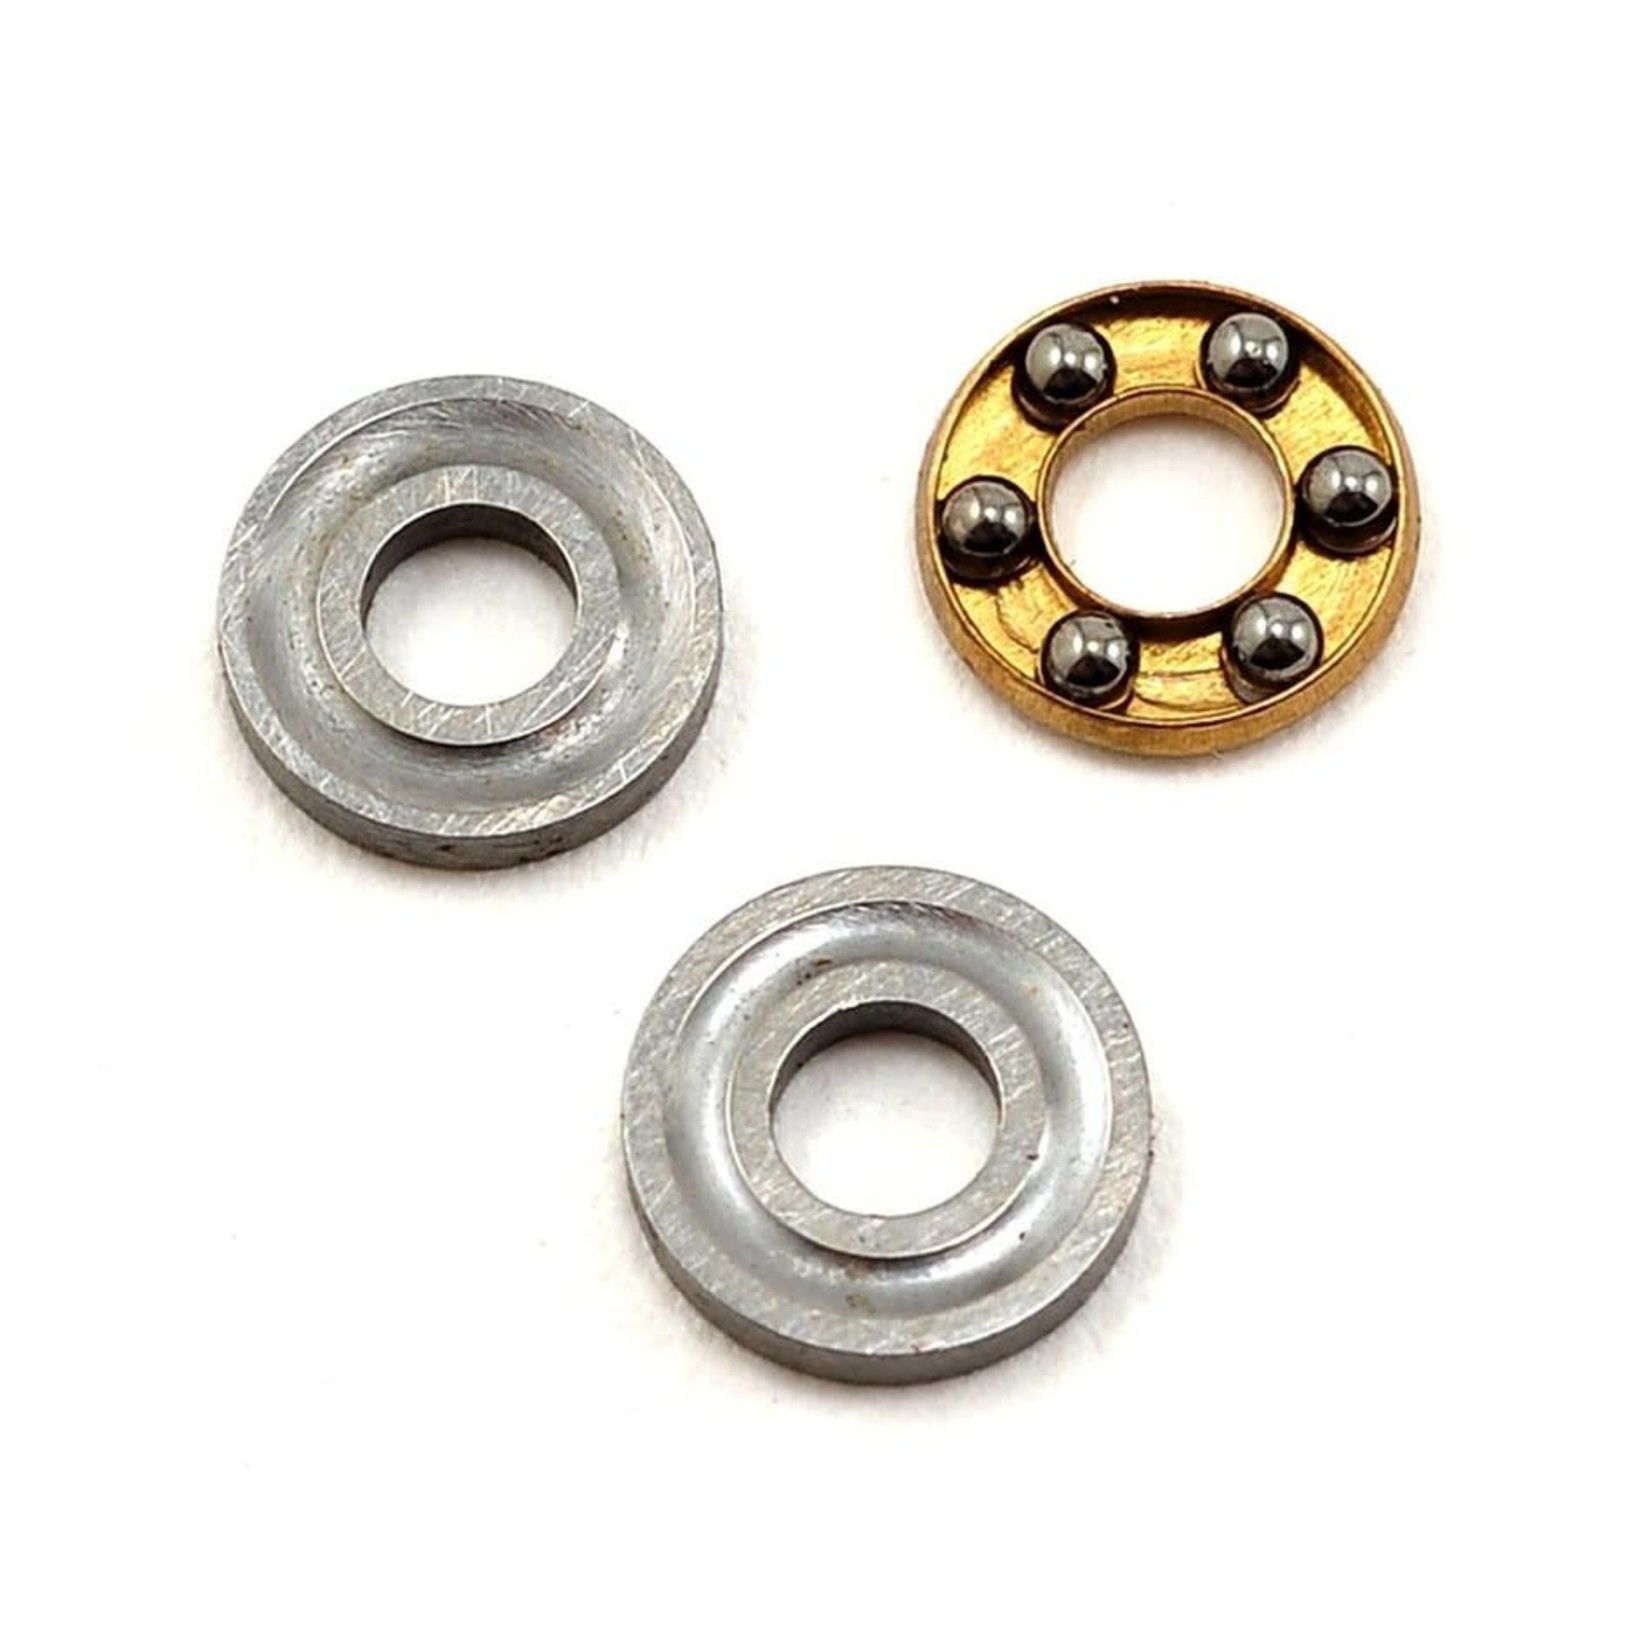 Avid RC Avid RC 2.5x6x3mm Associated/TLR Differential Thrust Bearing (Tungsten Carbide) #F2.5-6M/C